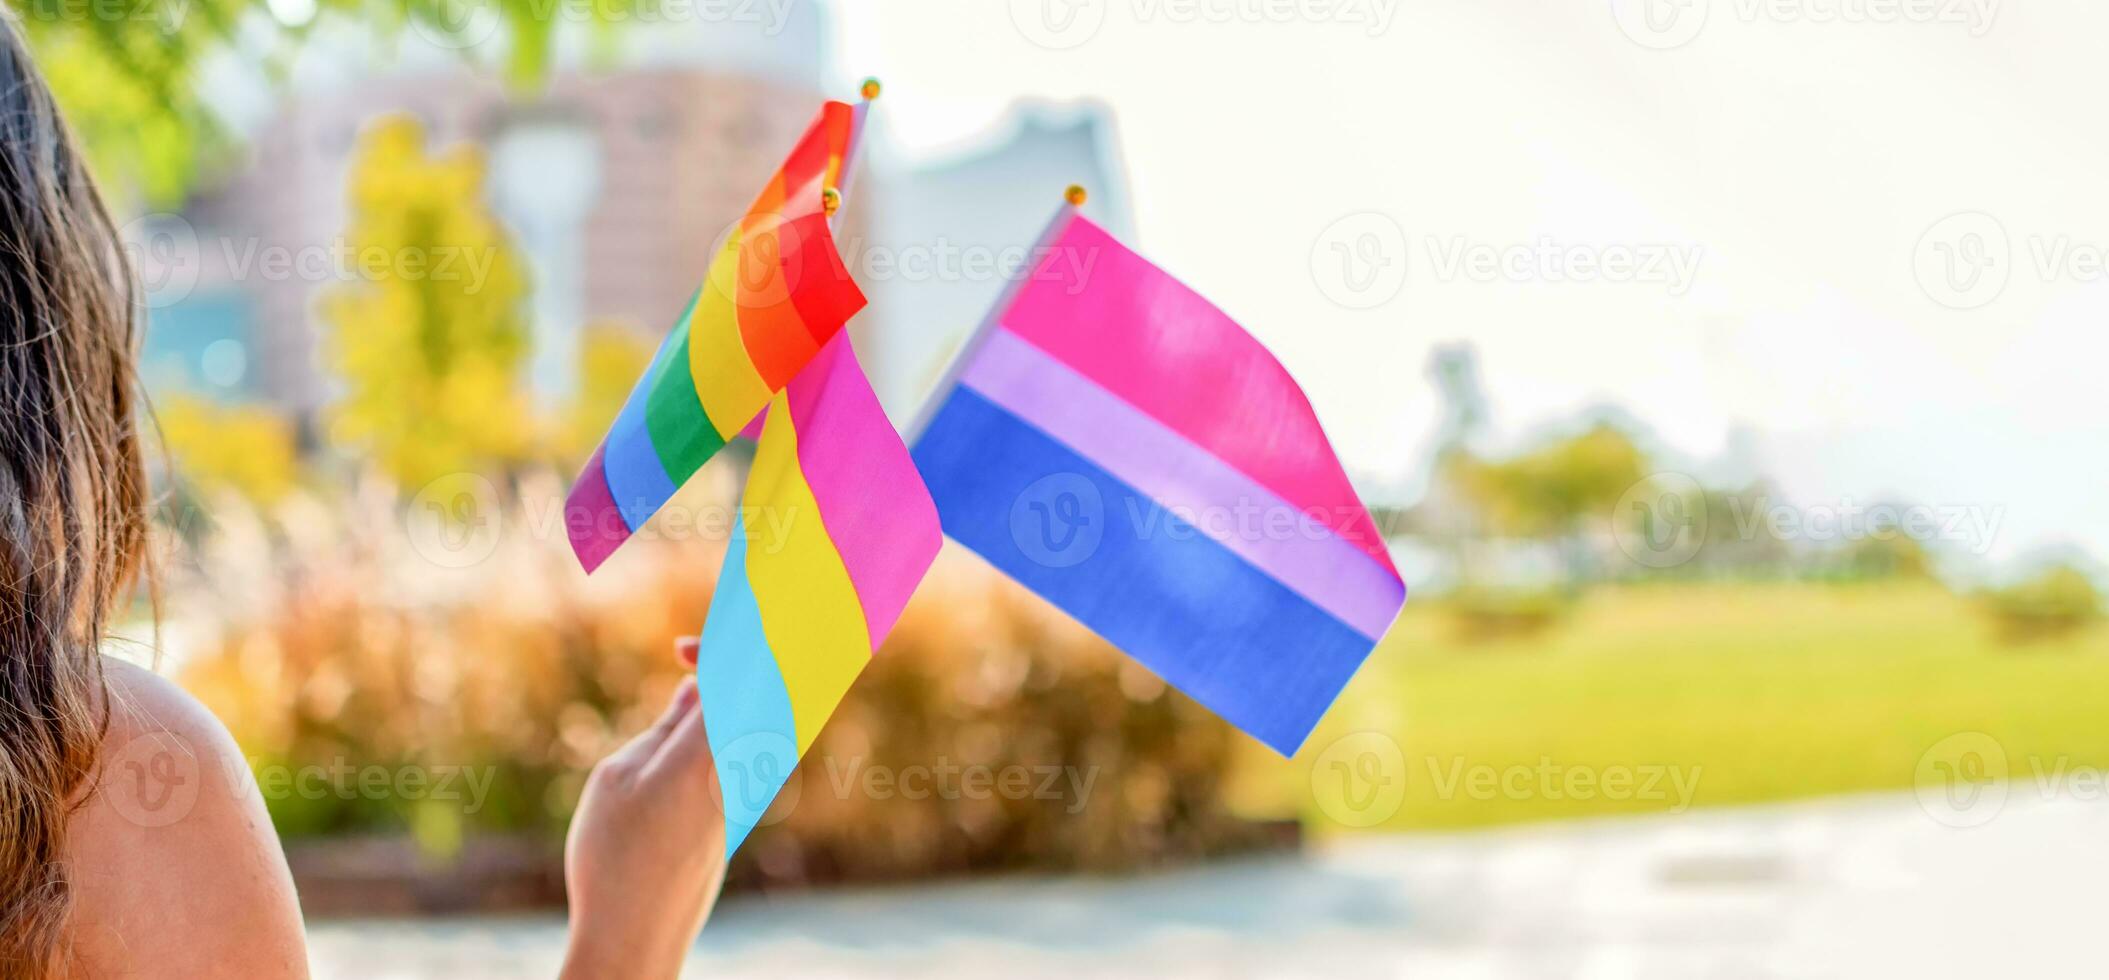 Gender queer. People wave LGBTQ gay pride rainbow flags at a pride event. Selective focus. photo